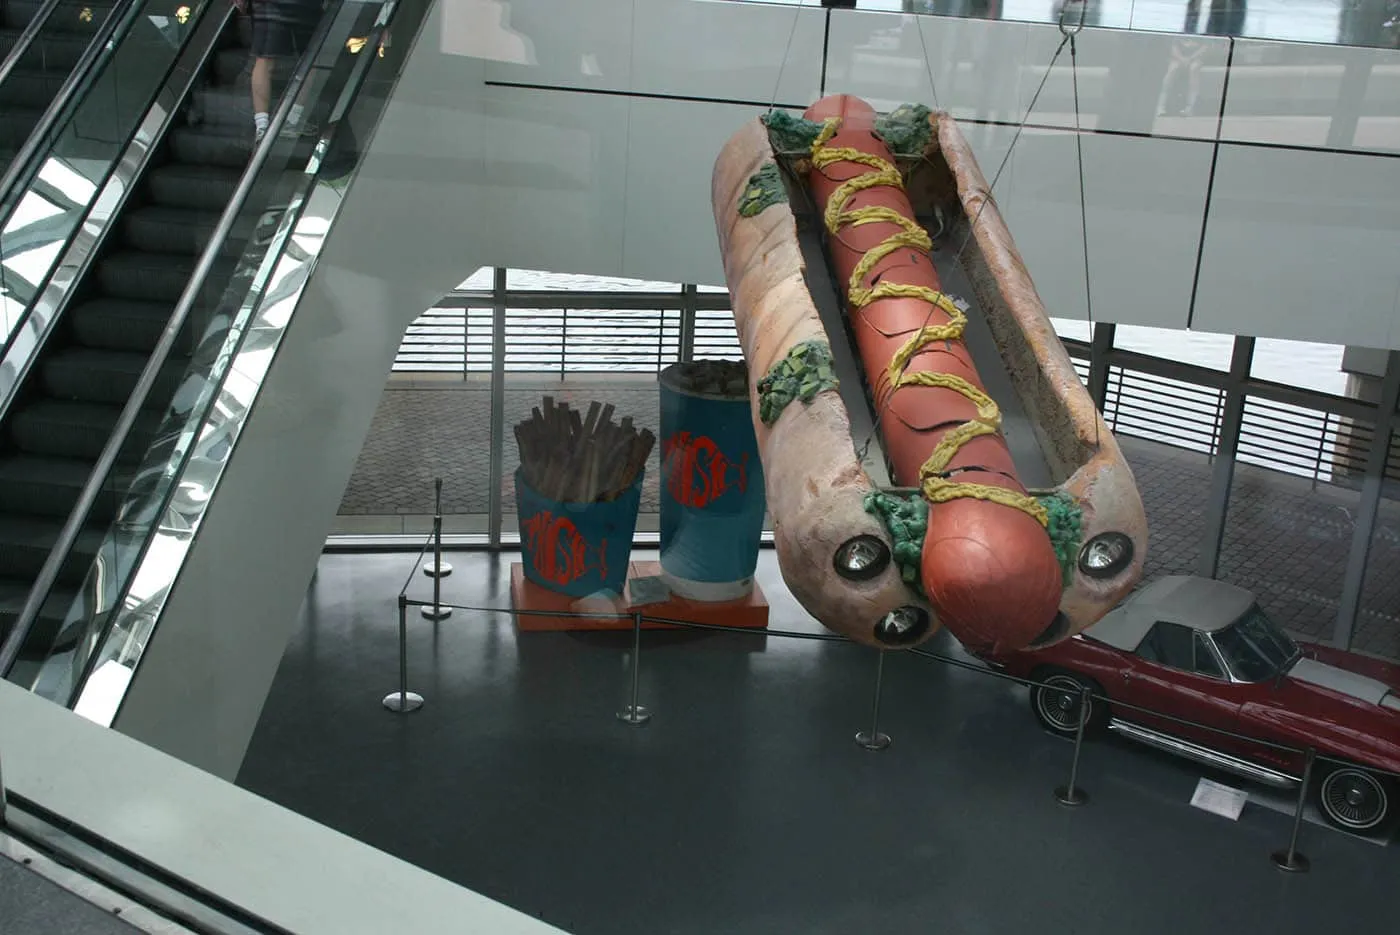 Giant Hot Dog and Fries at the Rock and Roll Hall of Fame in Cleveland, Ohio